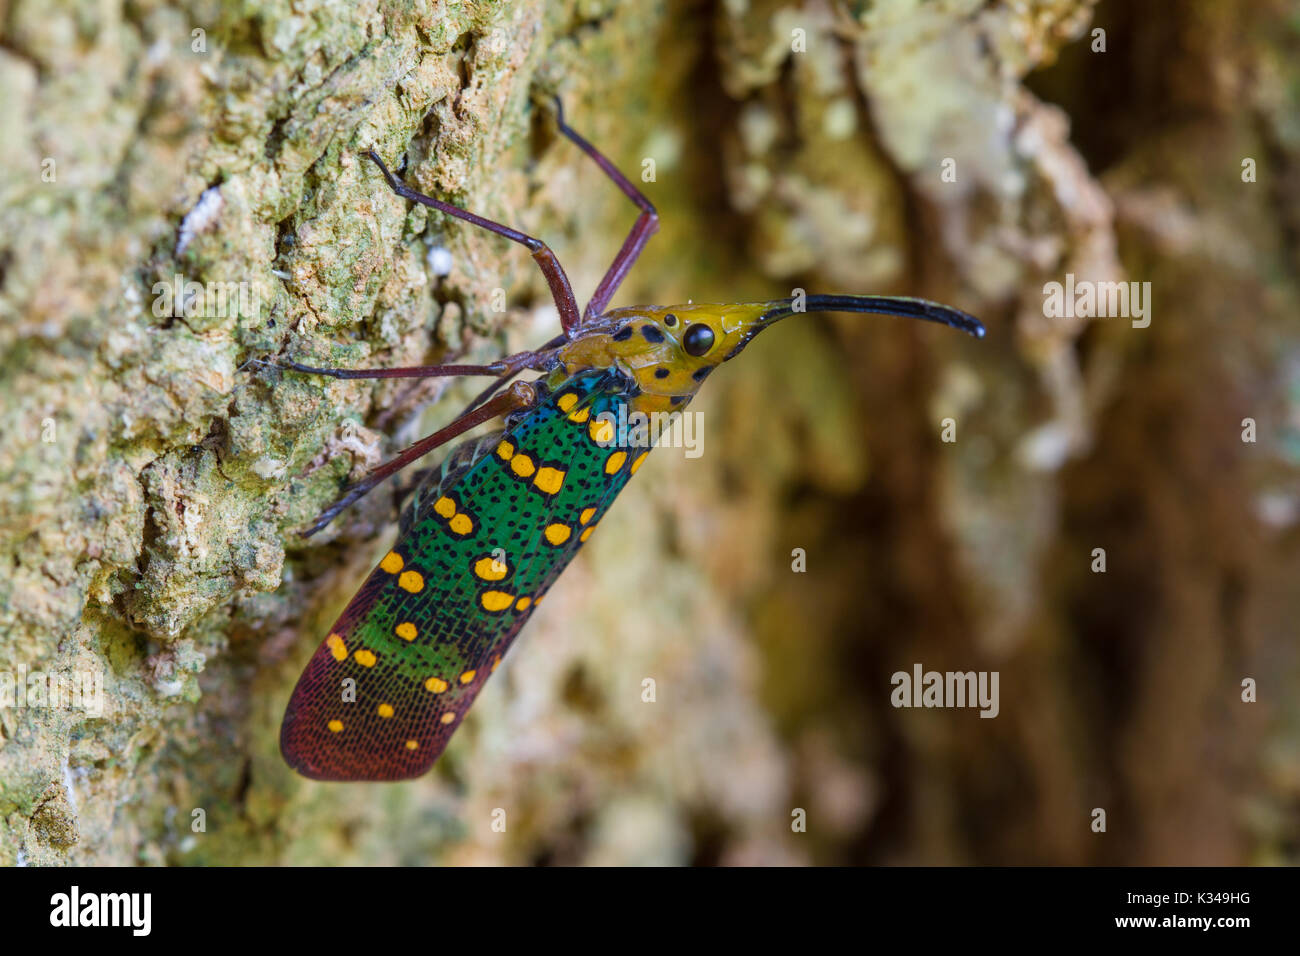 Cicada or Lanternfly (Saiva gemmata ) insect on tree in nature Stock Photo